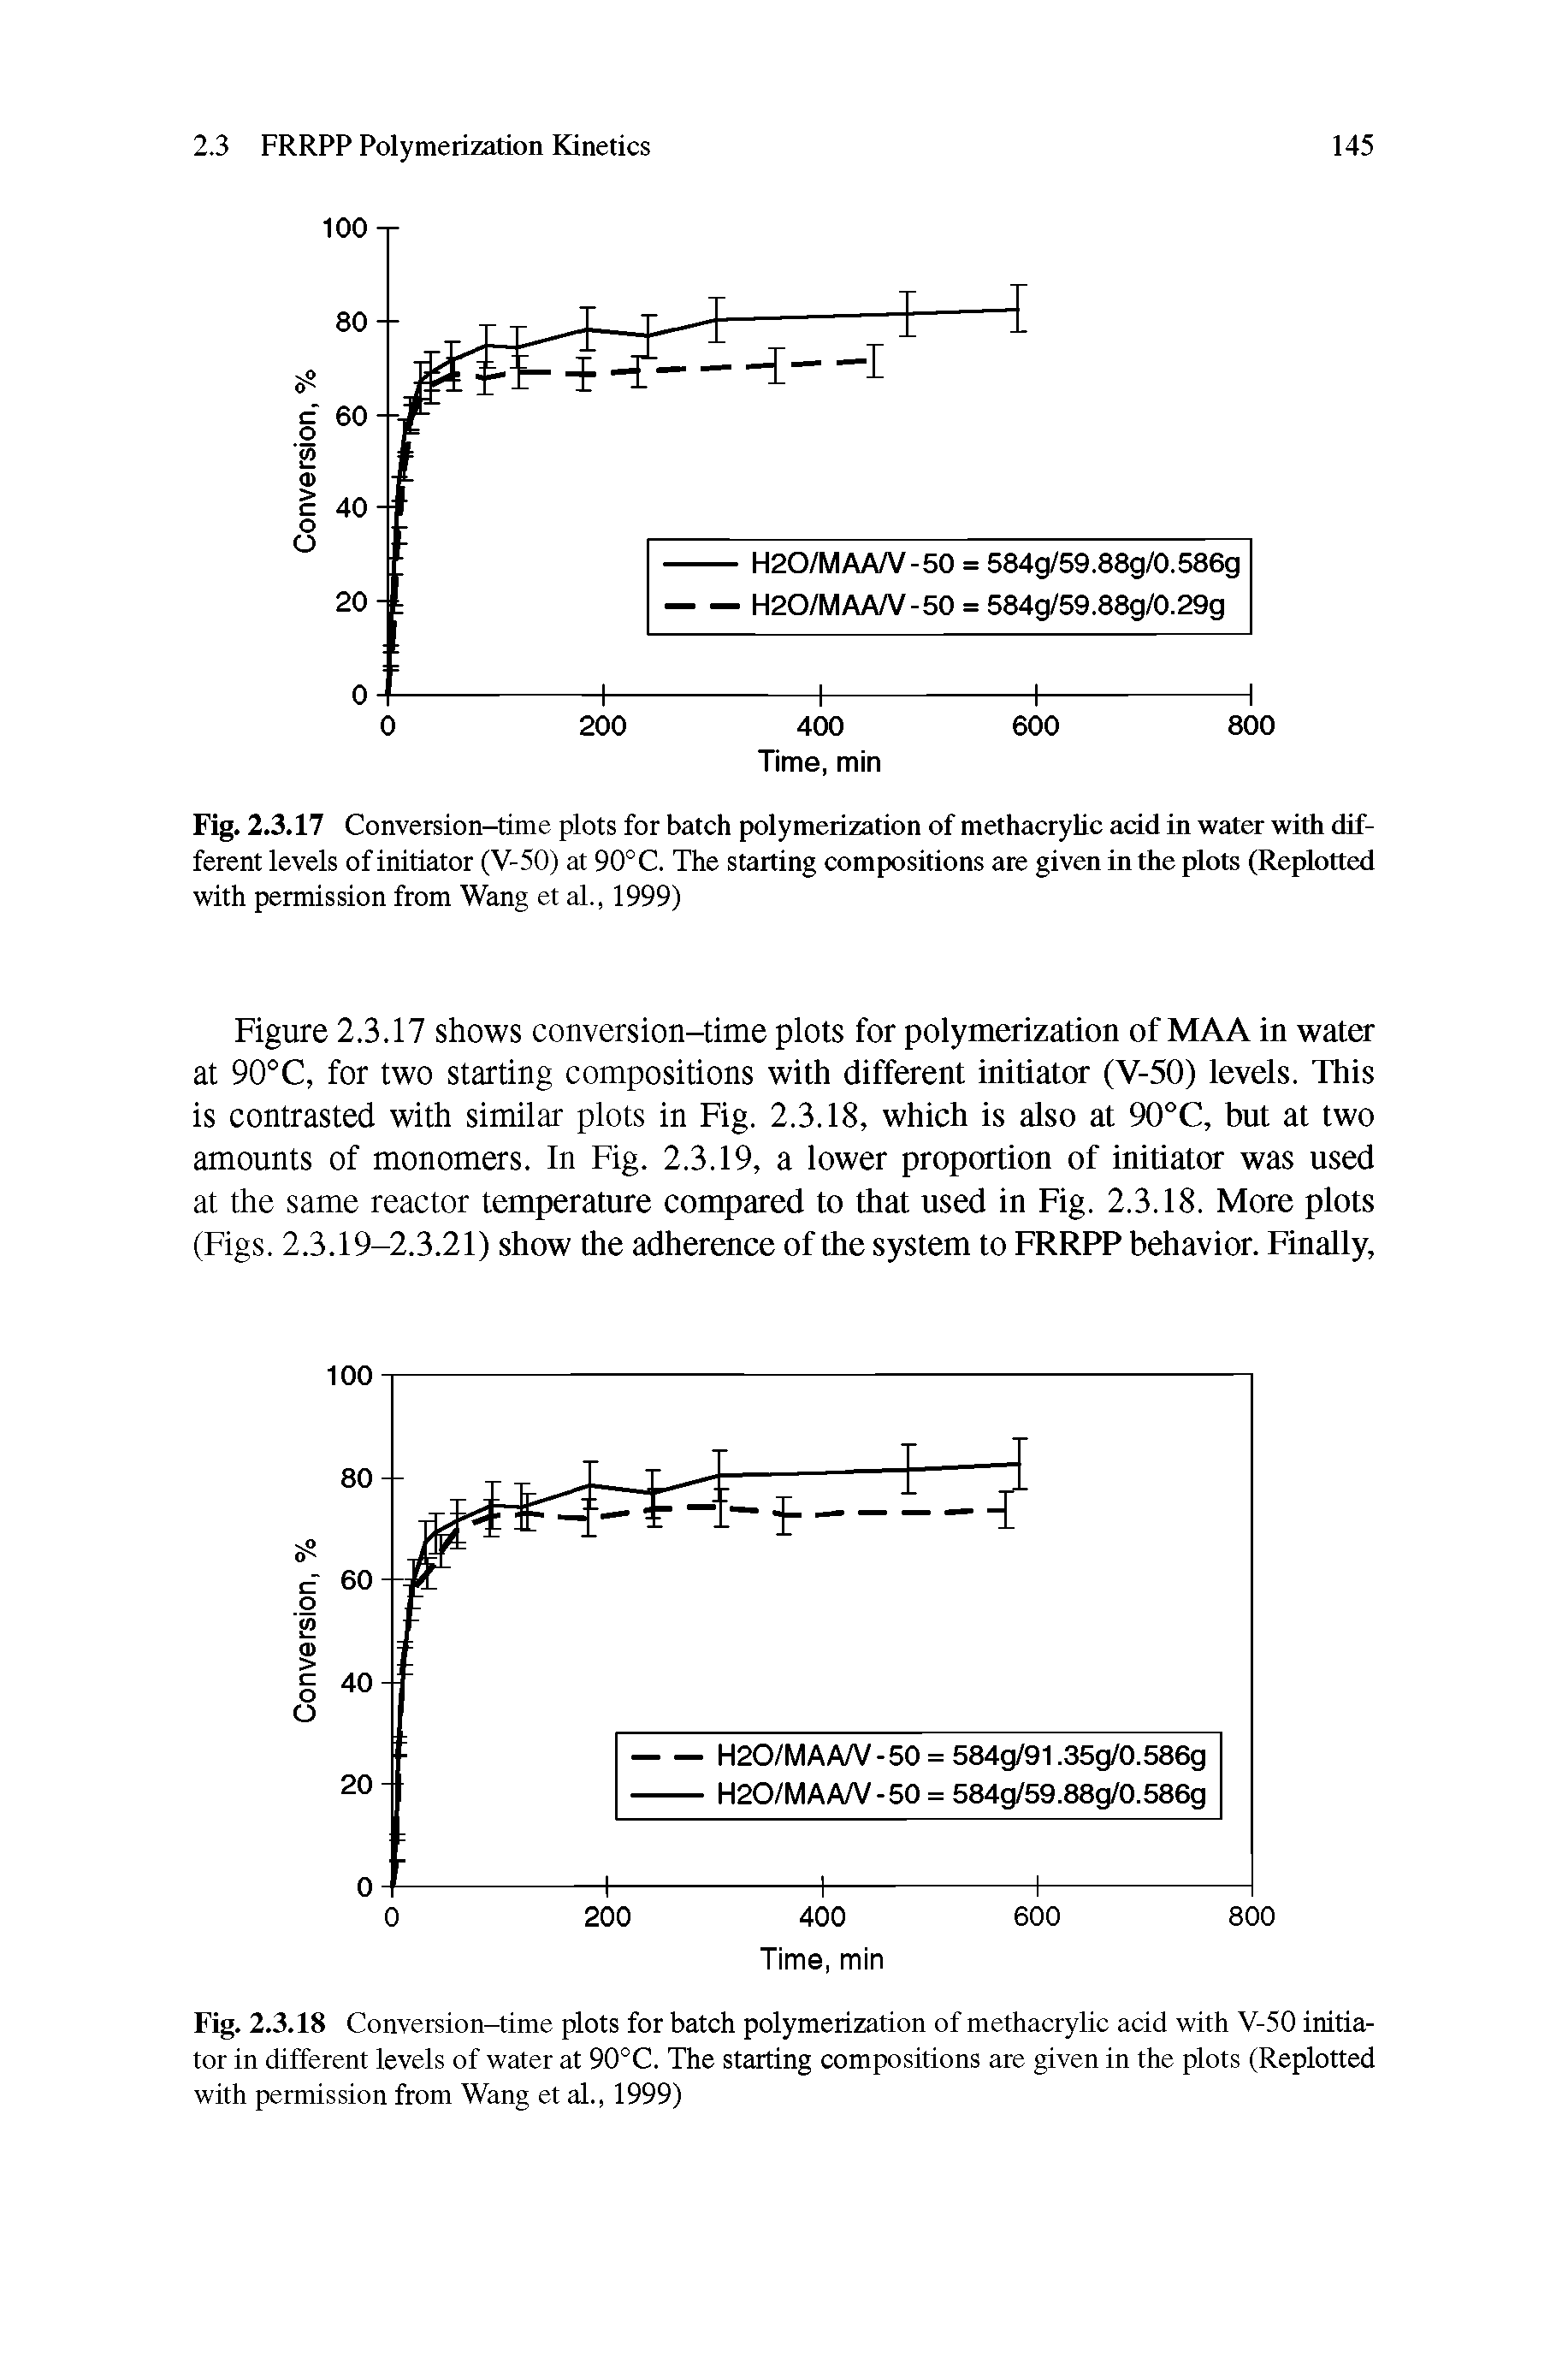 Fig. 2.3.17 Conversion-time plots for batch polymerization of methacryUc add in water with different levels of initiator (V-50) at 90°C. The starting compositions are given in the plots (Replotted with permission from Wang et al., 1999)...